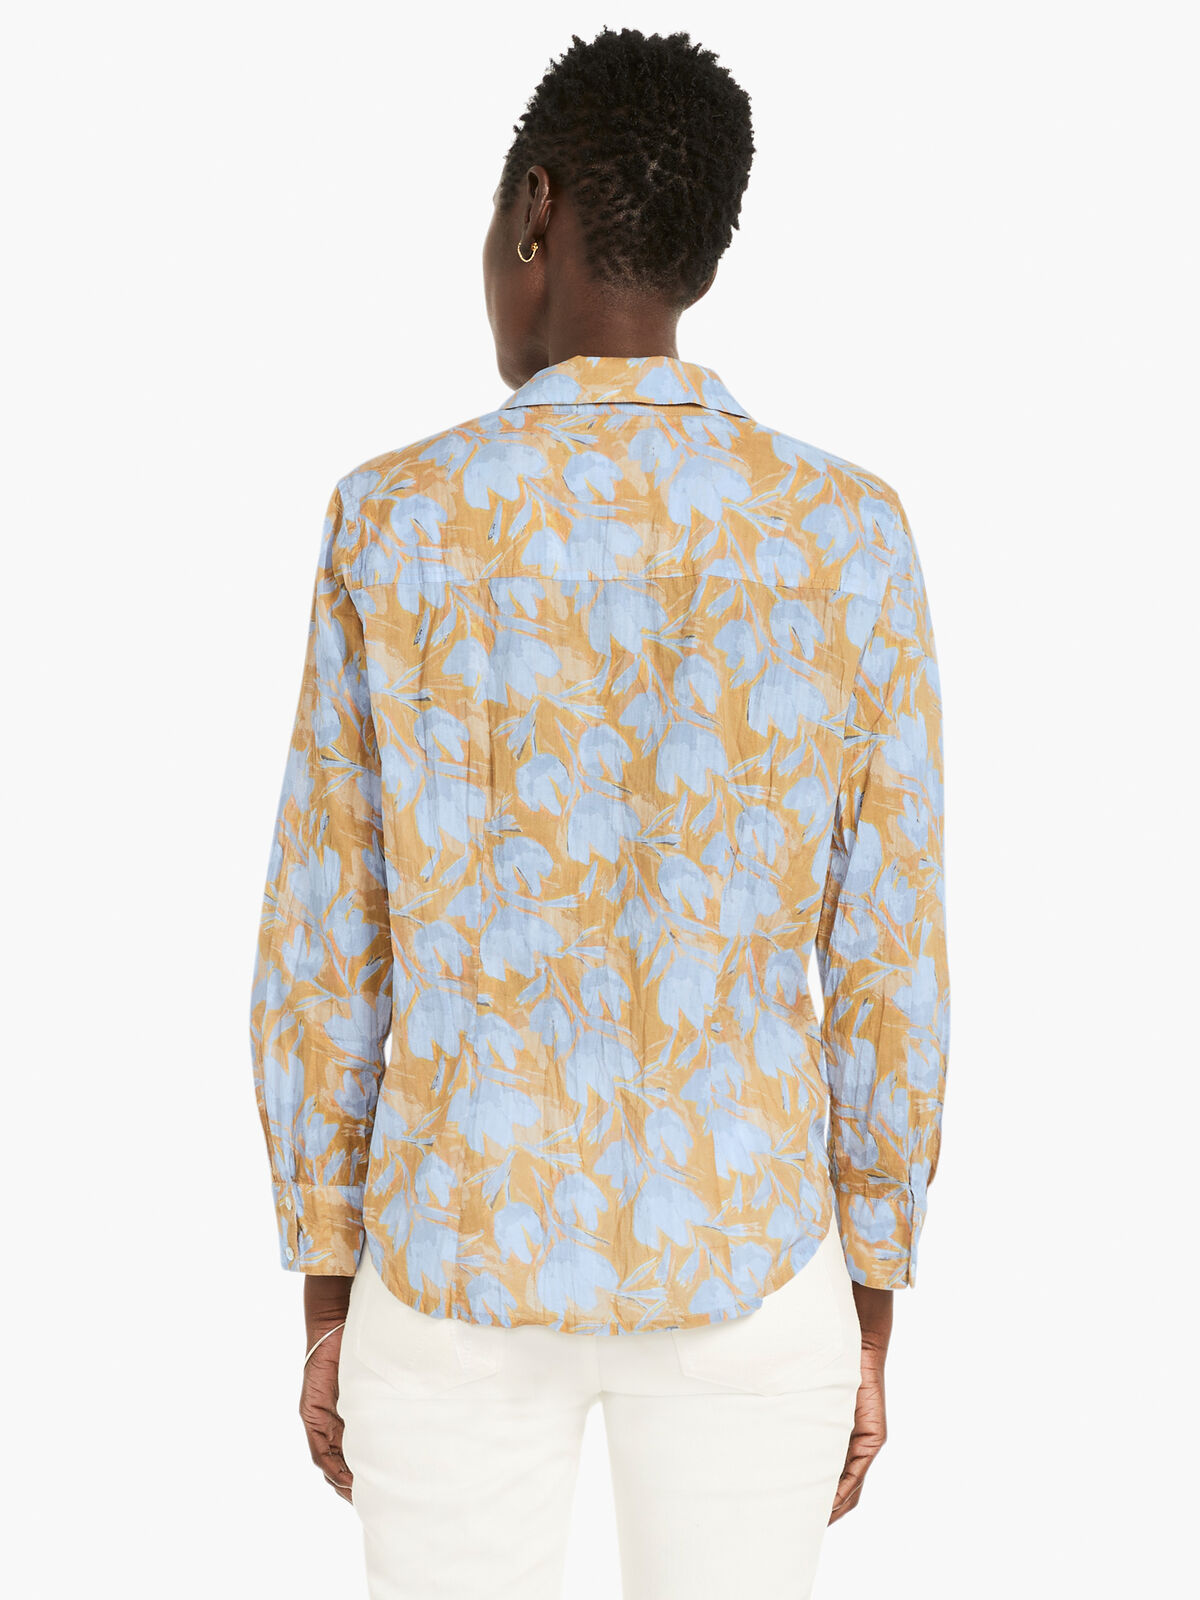 Midday Meadows Crinkle Shirt